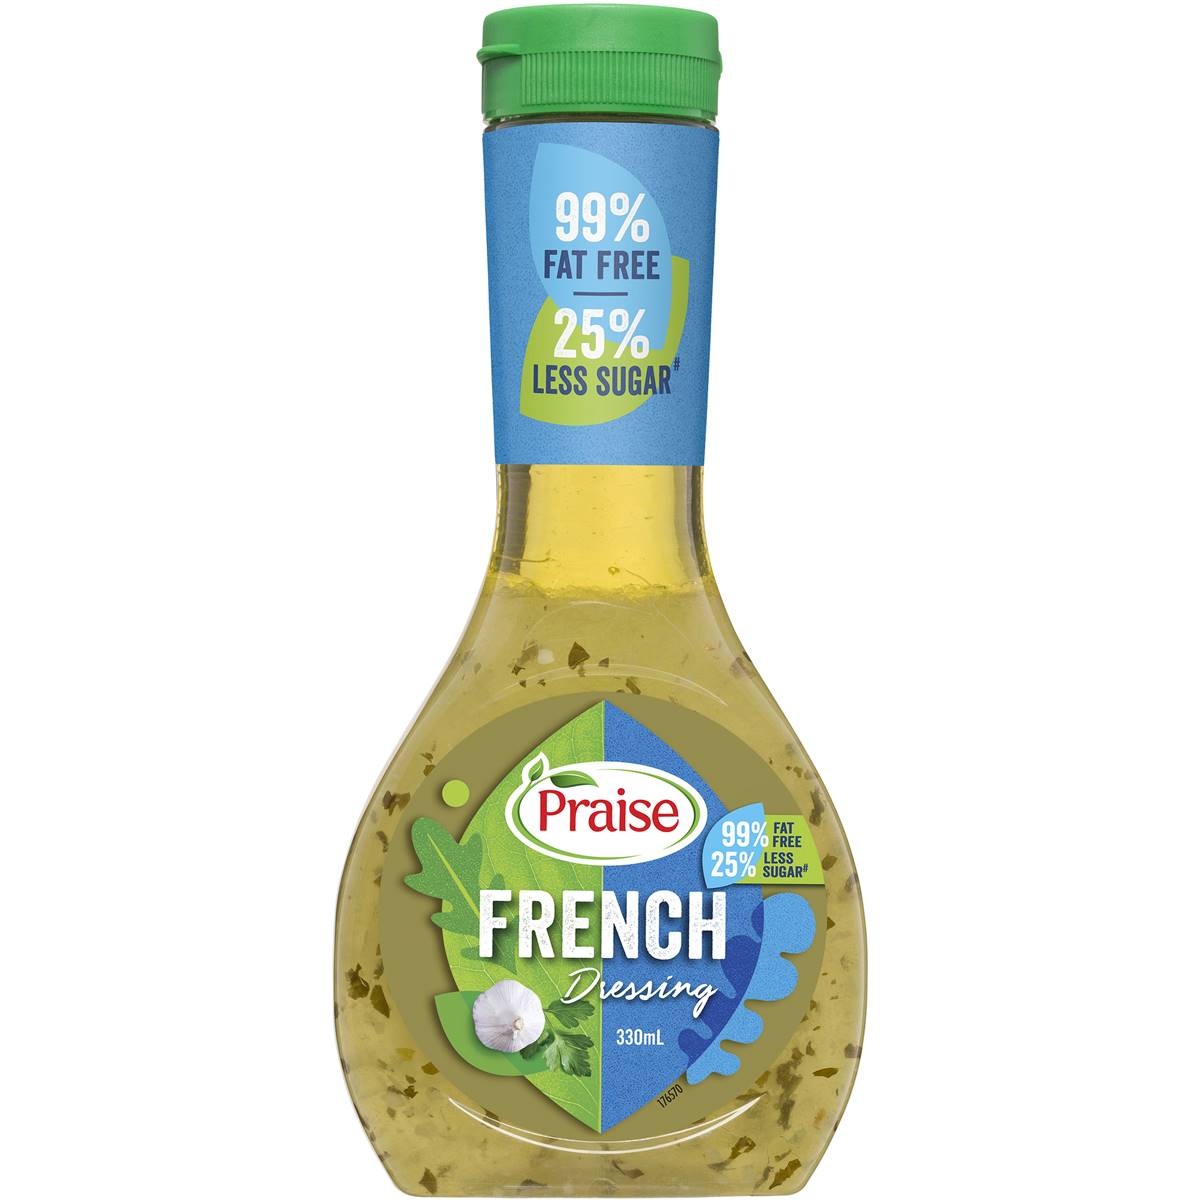 Calories in Praise Dressings French Fat Free calcount